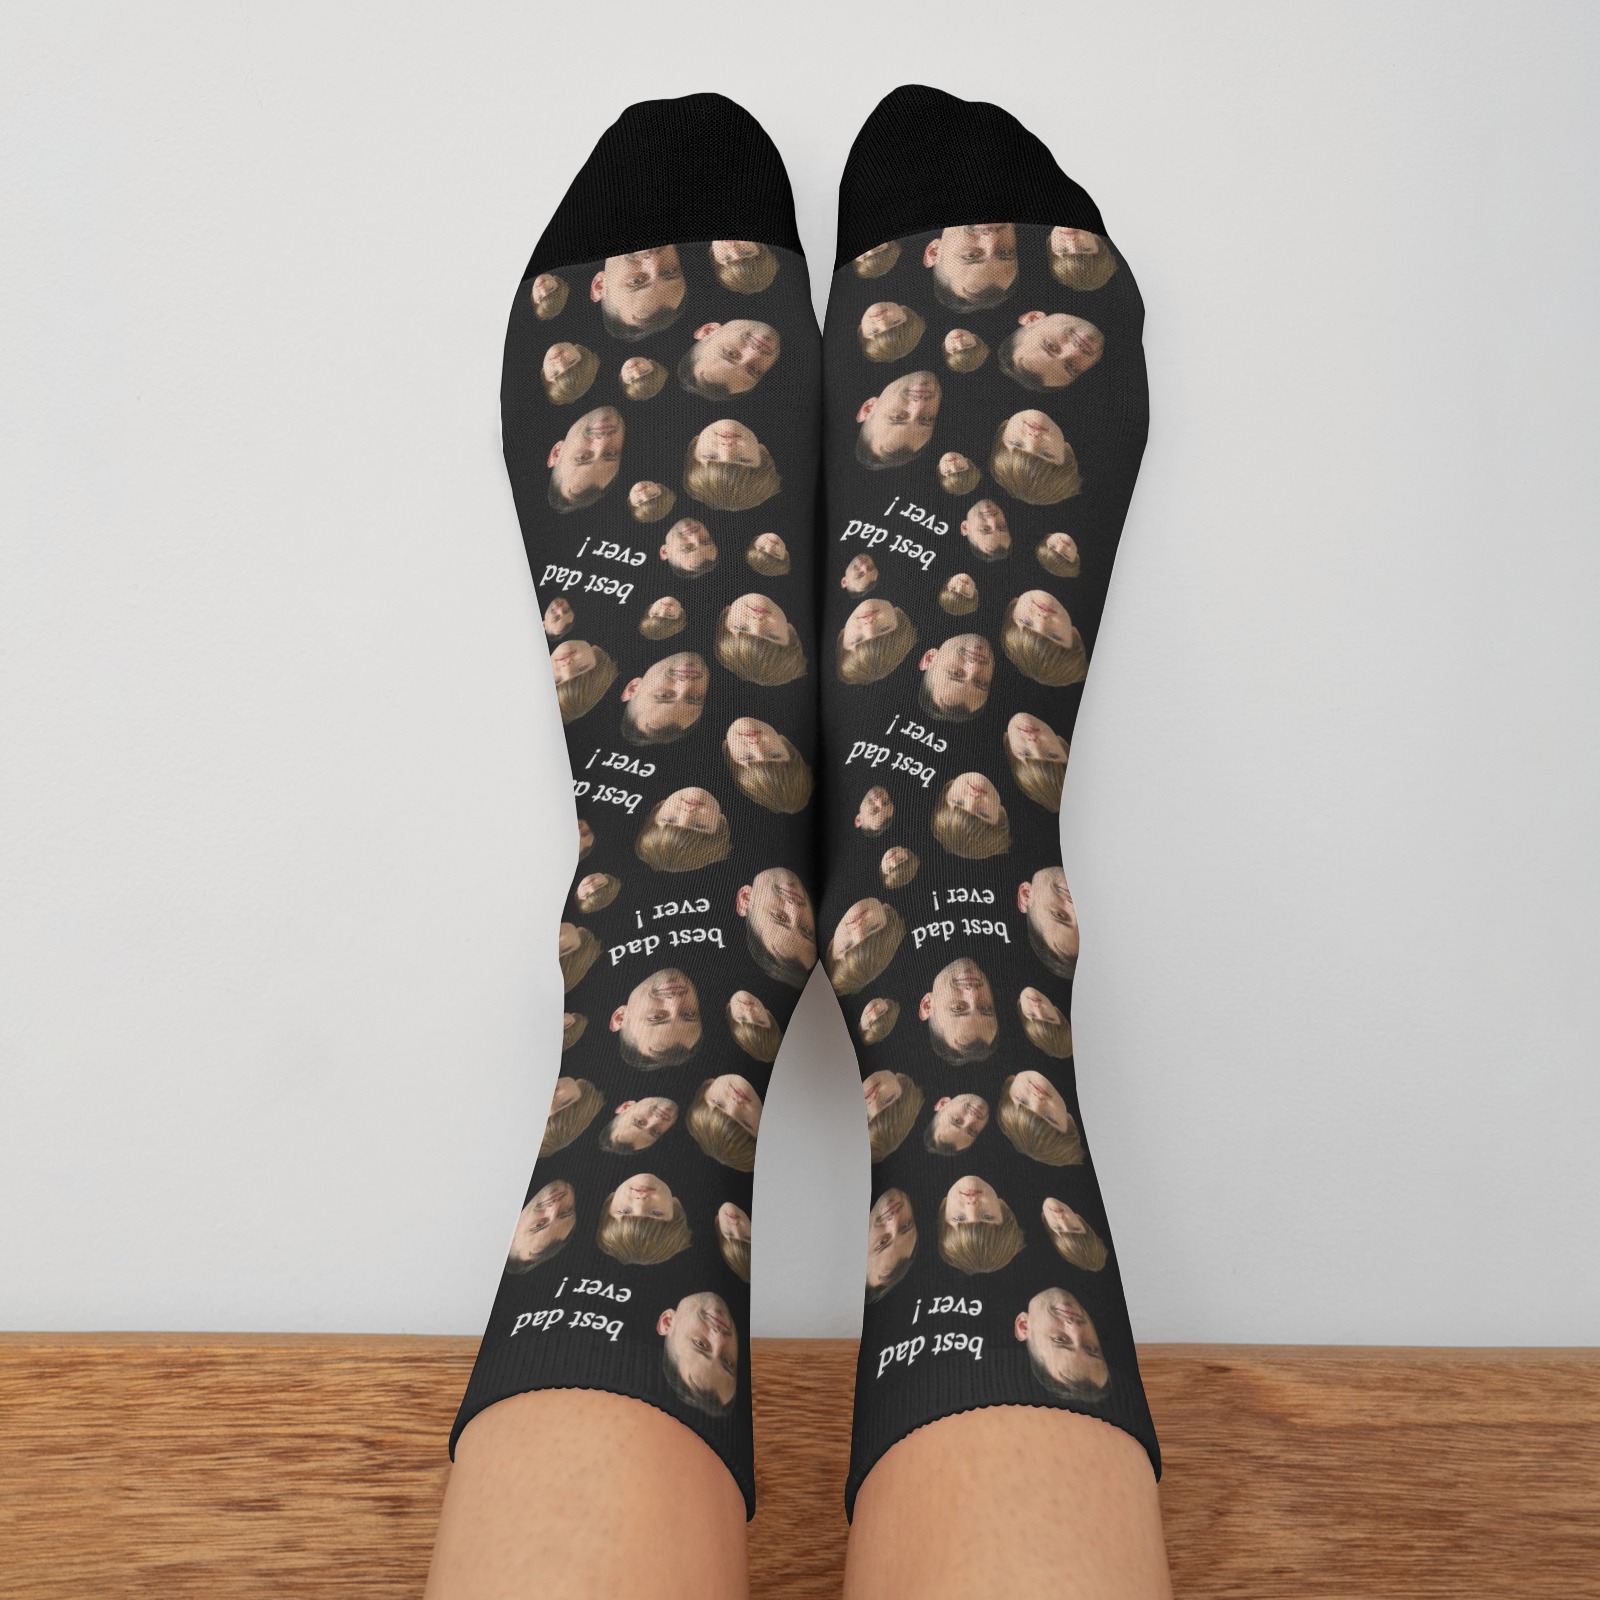 Custom Face Socks To Be Best Dad Ever